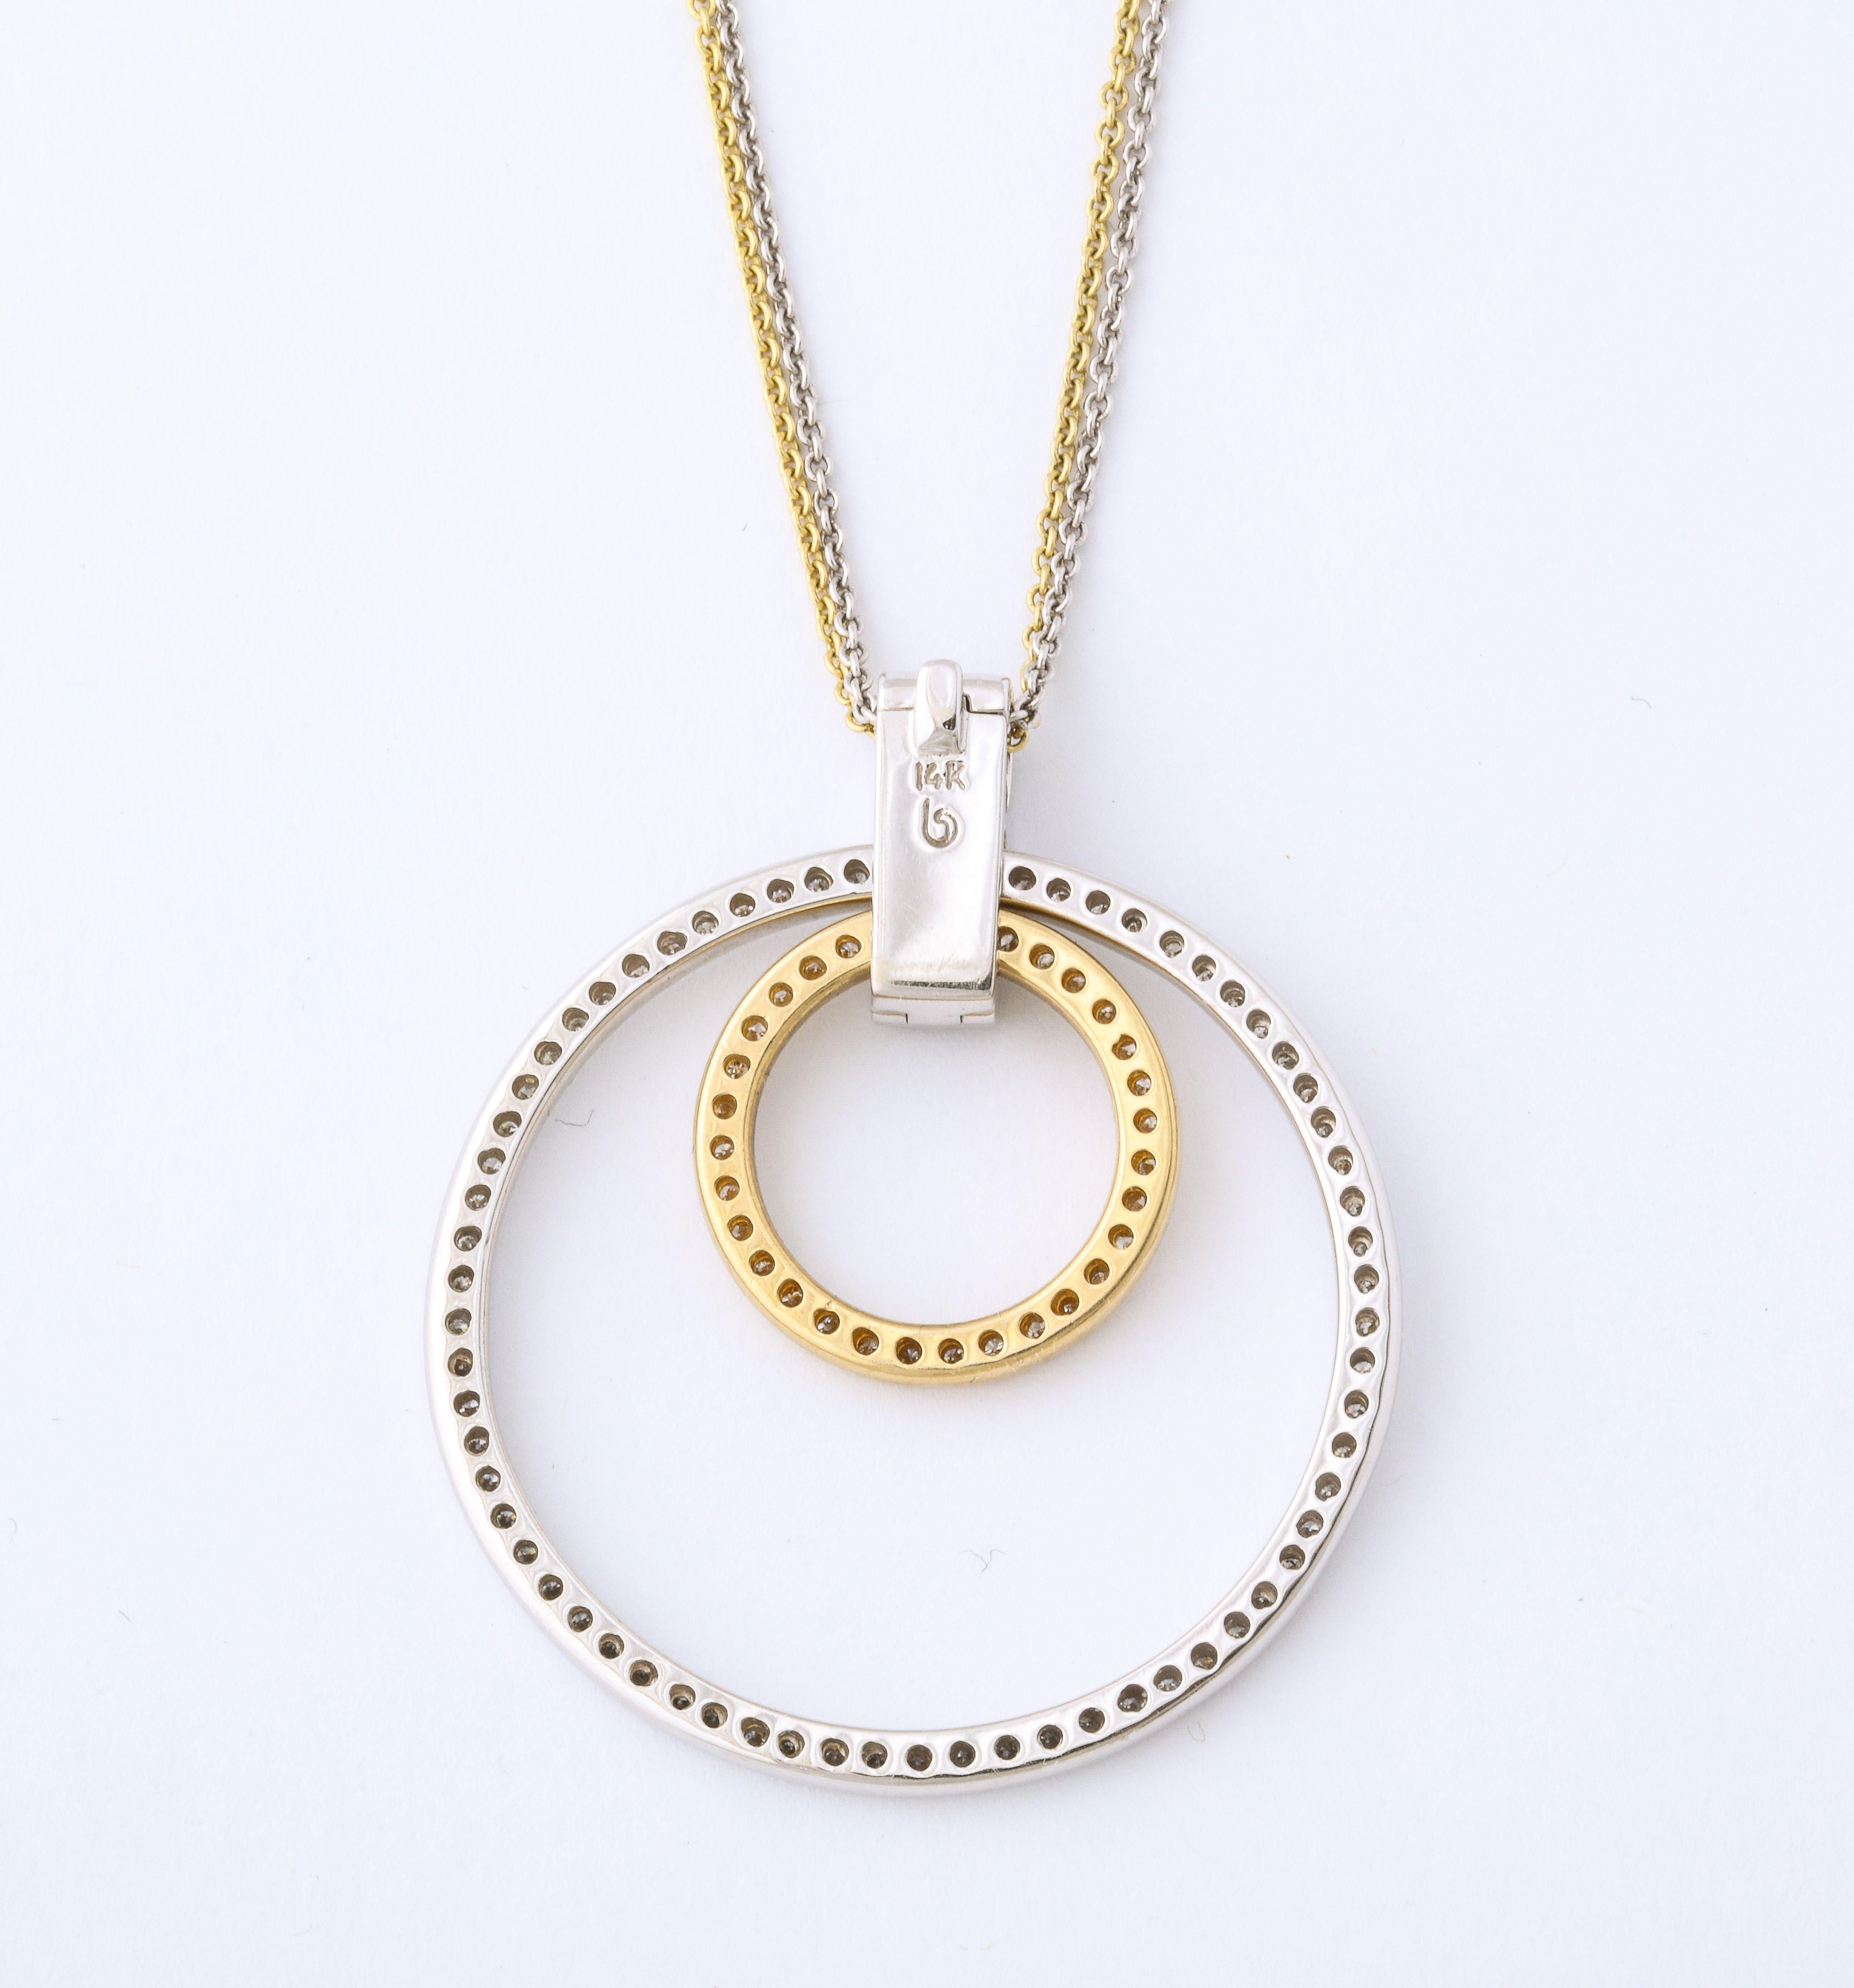 Women's White and Yellow Gold Diamond Necklace